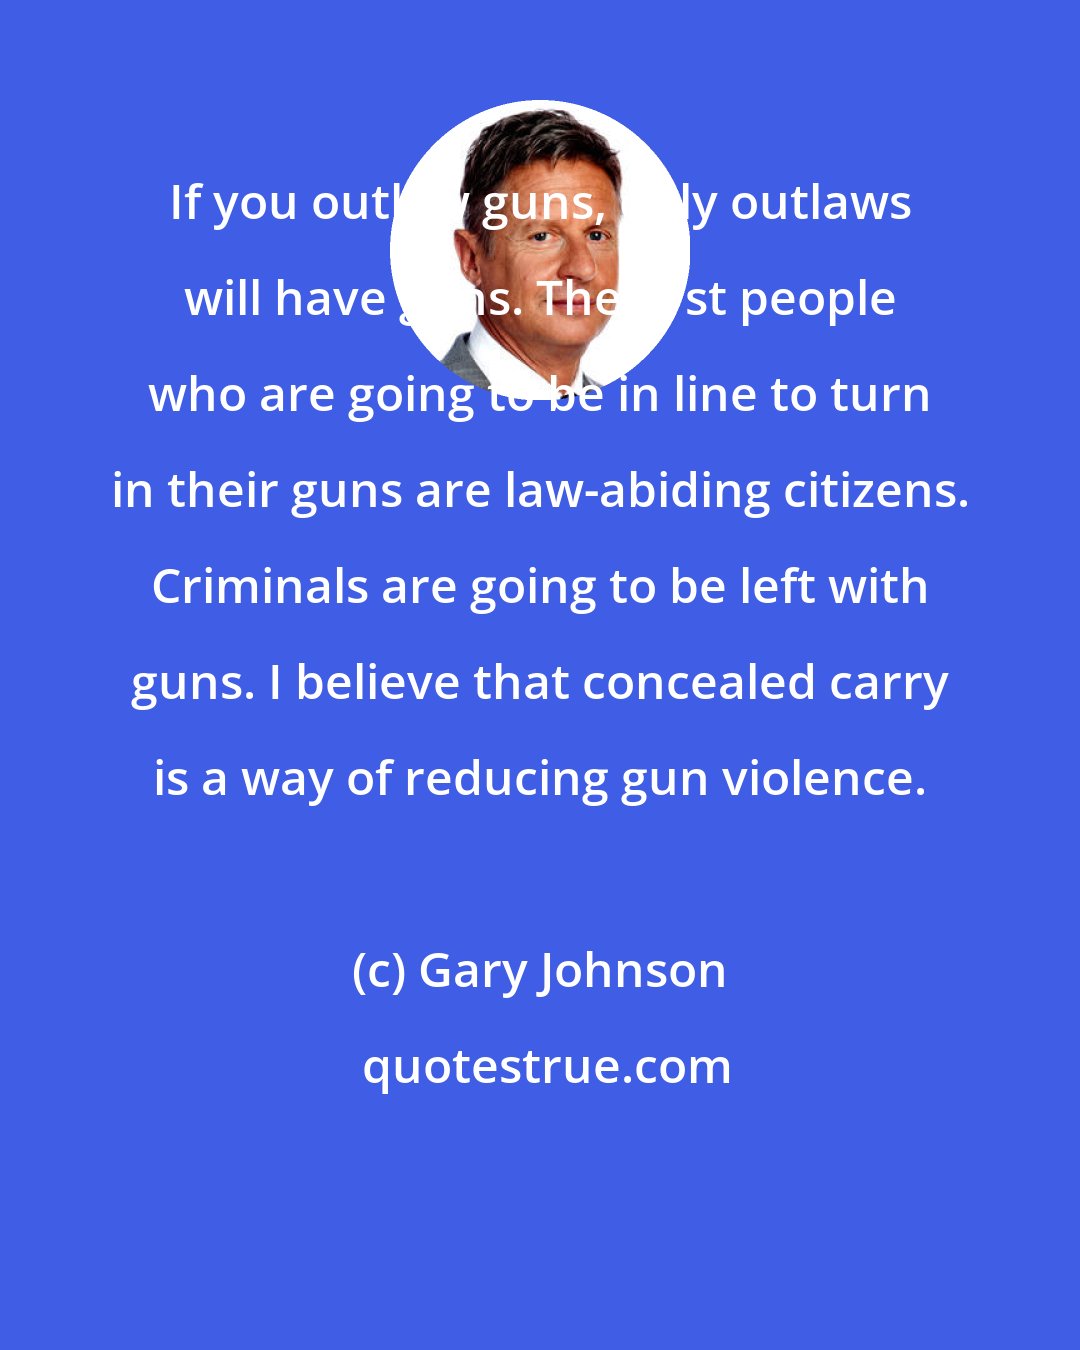 Gary Johnson: If you outlaw guns, only outlaws will have guns. The first people who are going to be in line to turn in their guns are law-abiding citizens. Criminals are going to be left with guns. I believe that concealed carry is a way of reducing gun violence.